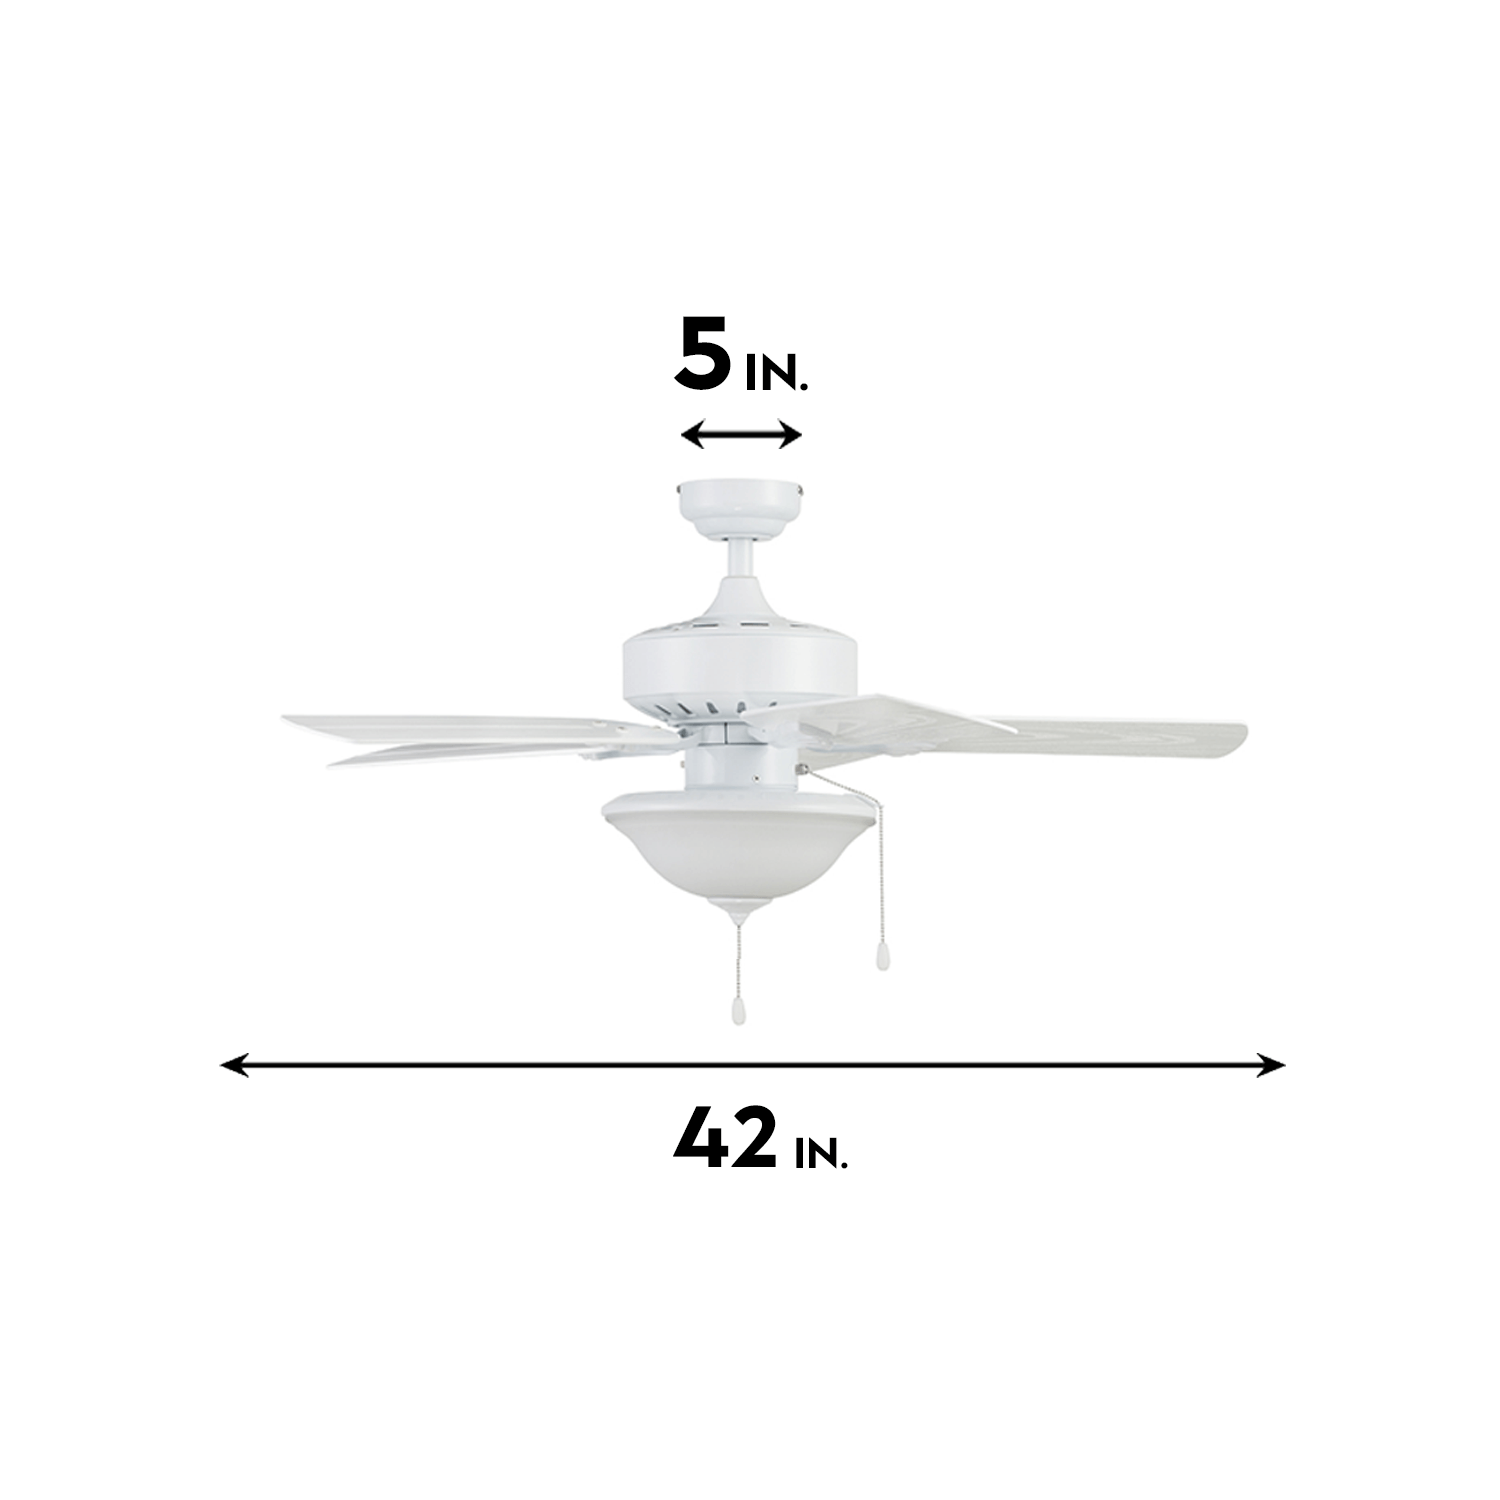 42 Inch Viretta, White, Pull Chain, Indoor/Outdoor Ceiling Fan by Prominence Home